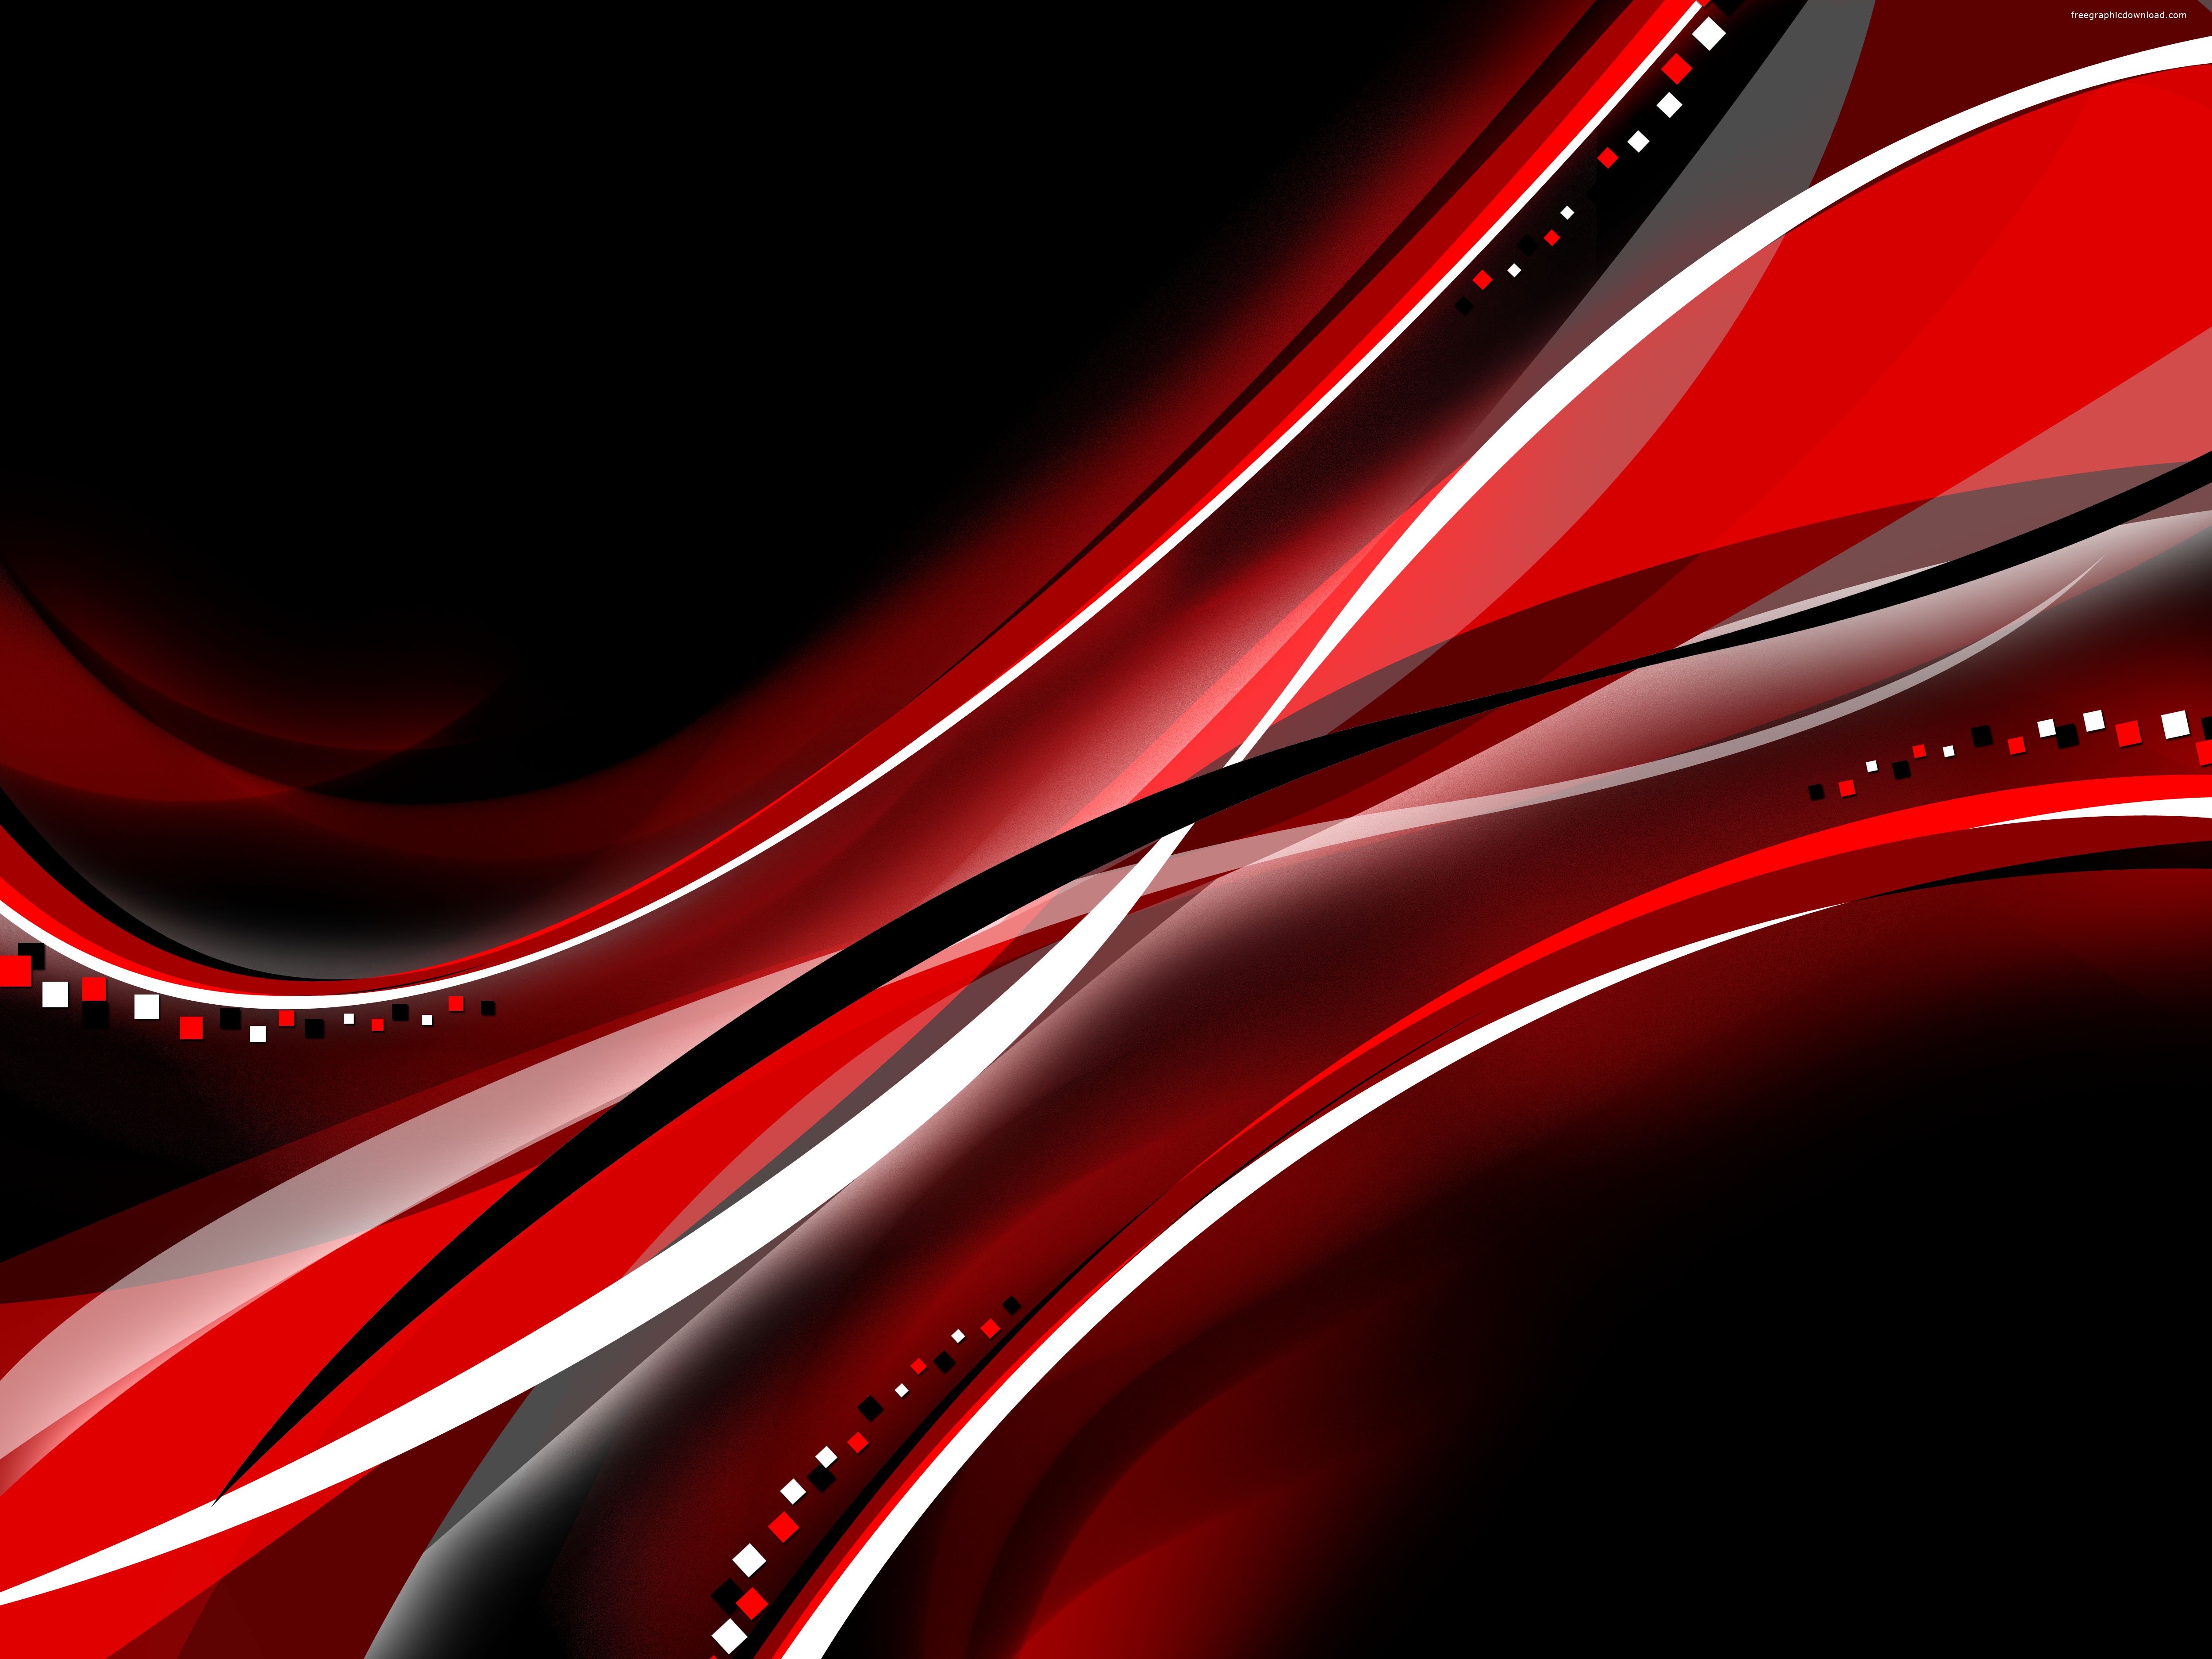 Black and Red Abstract Mobile Wallpaper 437   Amazing Wallpaperz 5000x3750